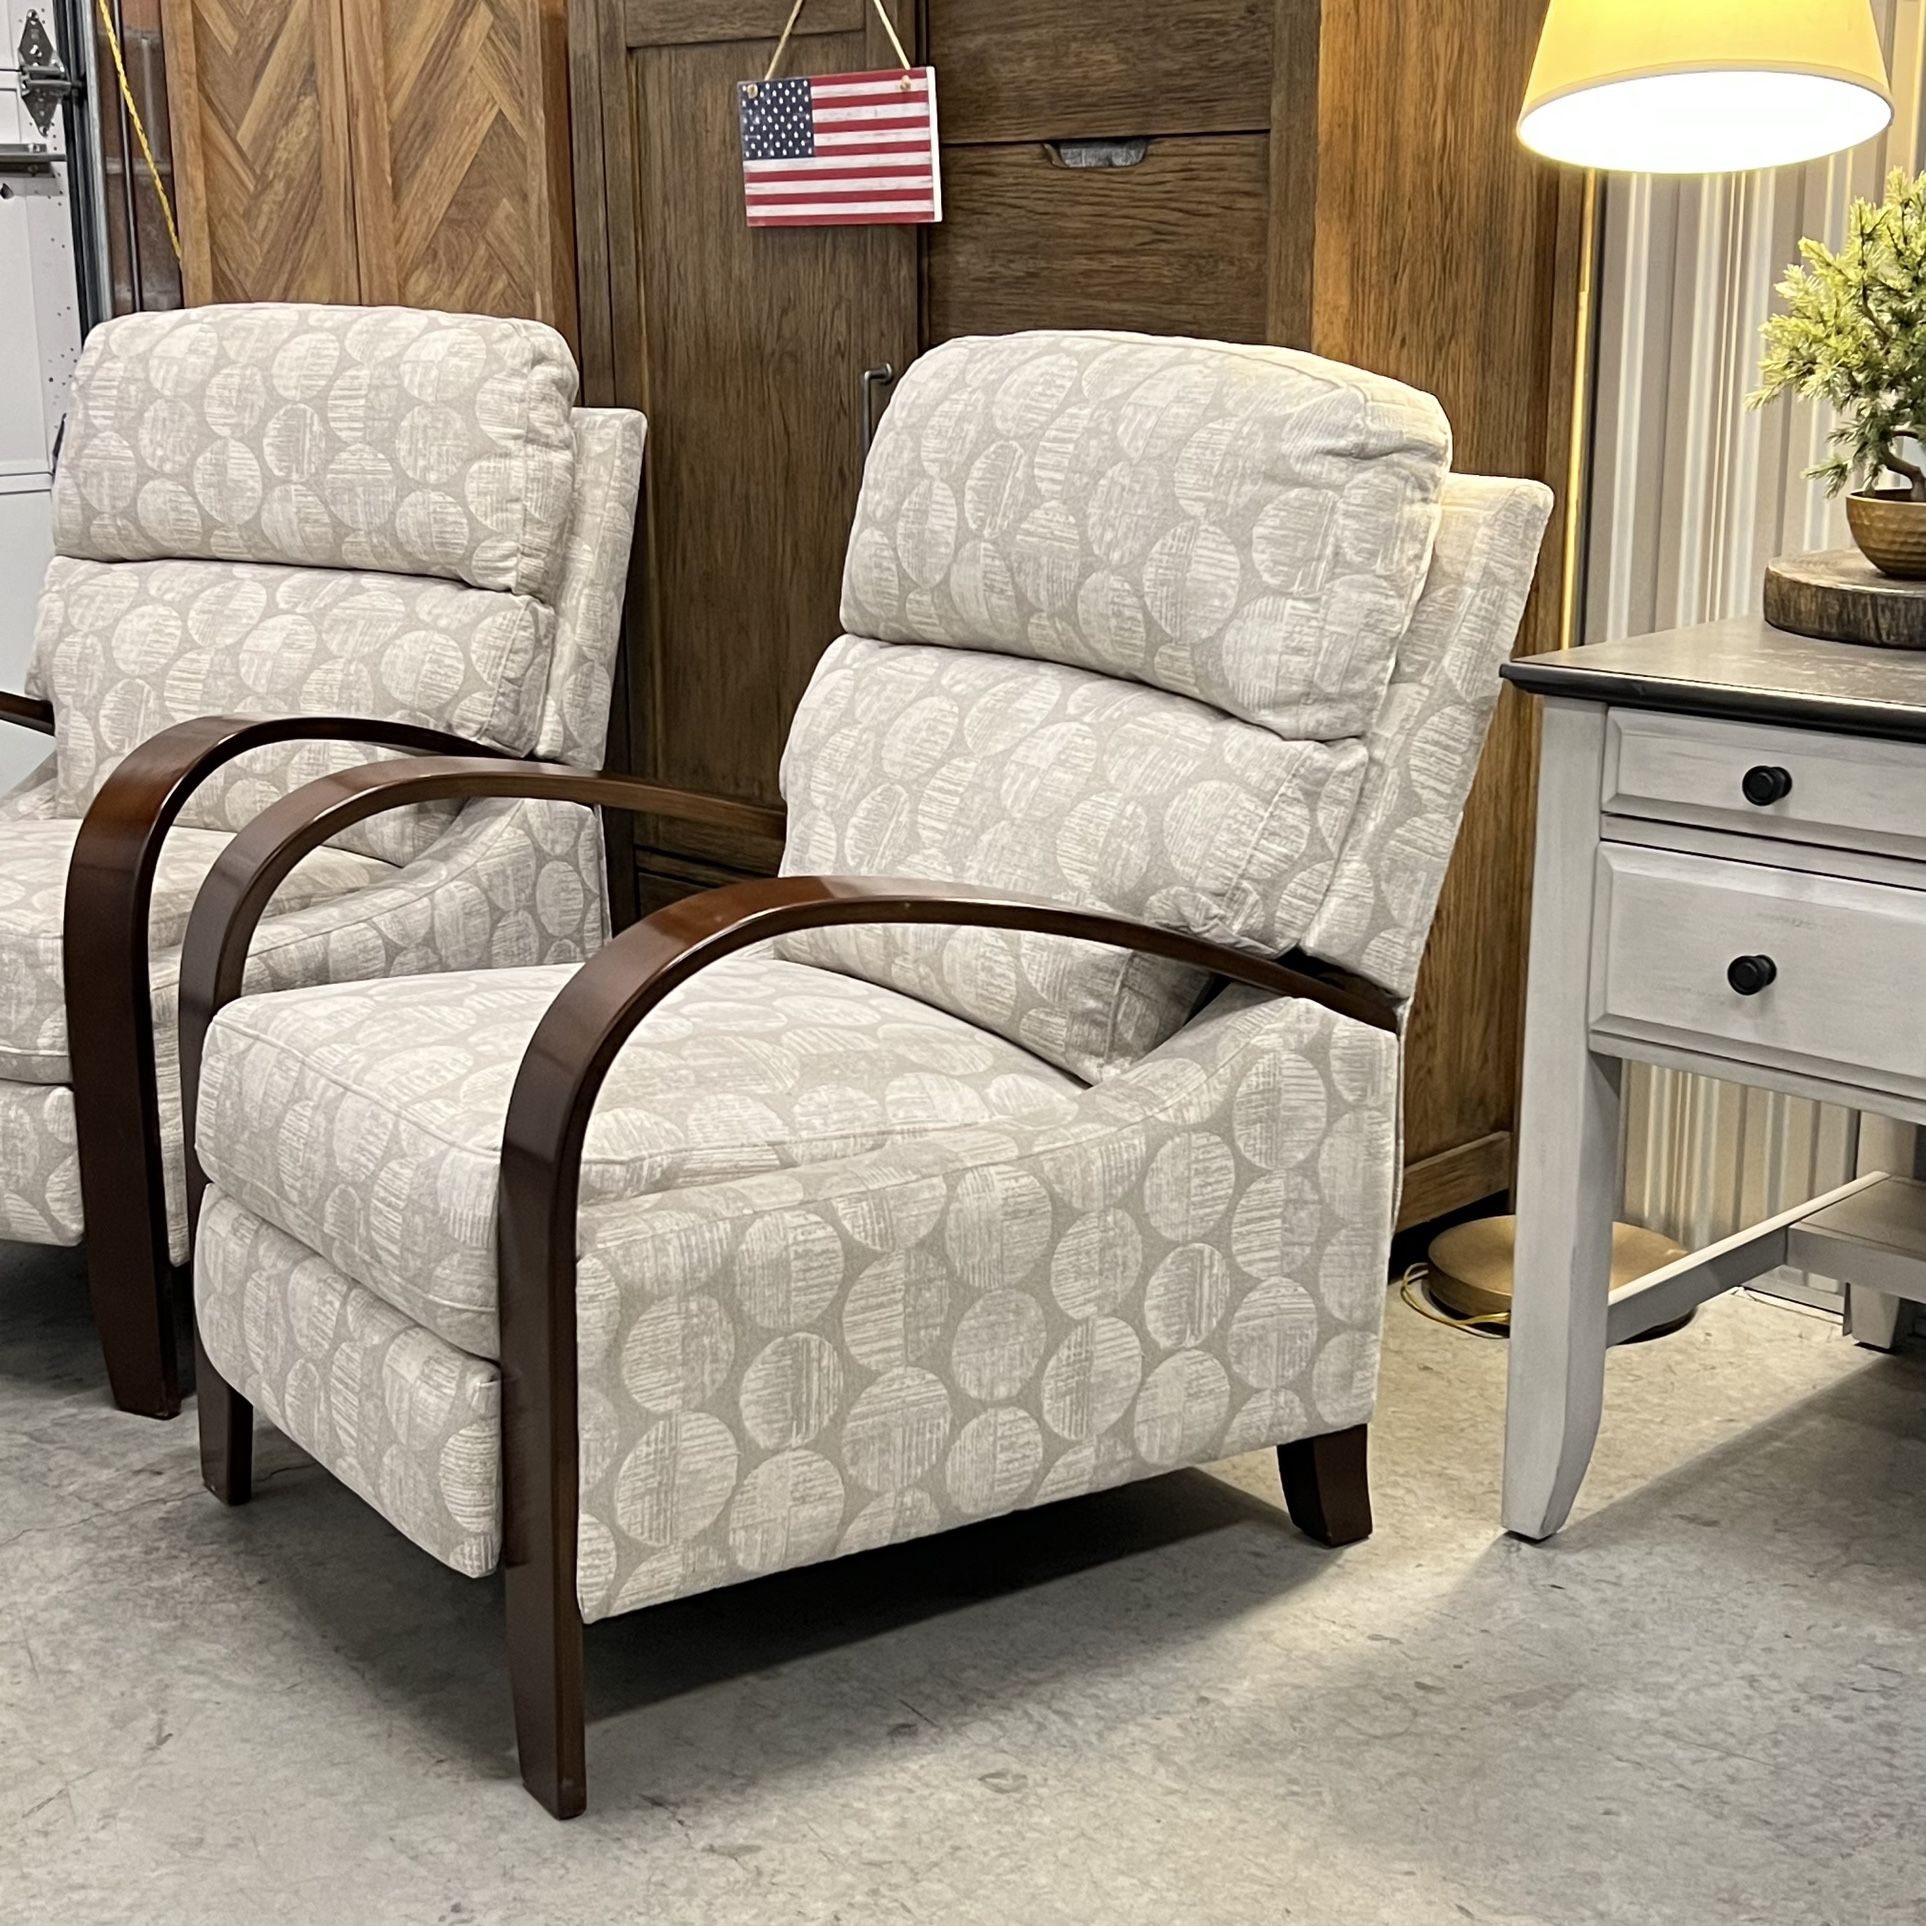 Free Delivery Brand New Quinley Fabric Pushback Recliner Accents Arm Chair, Costco $549+tax